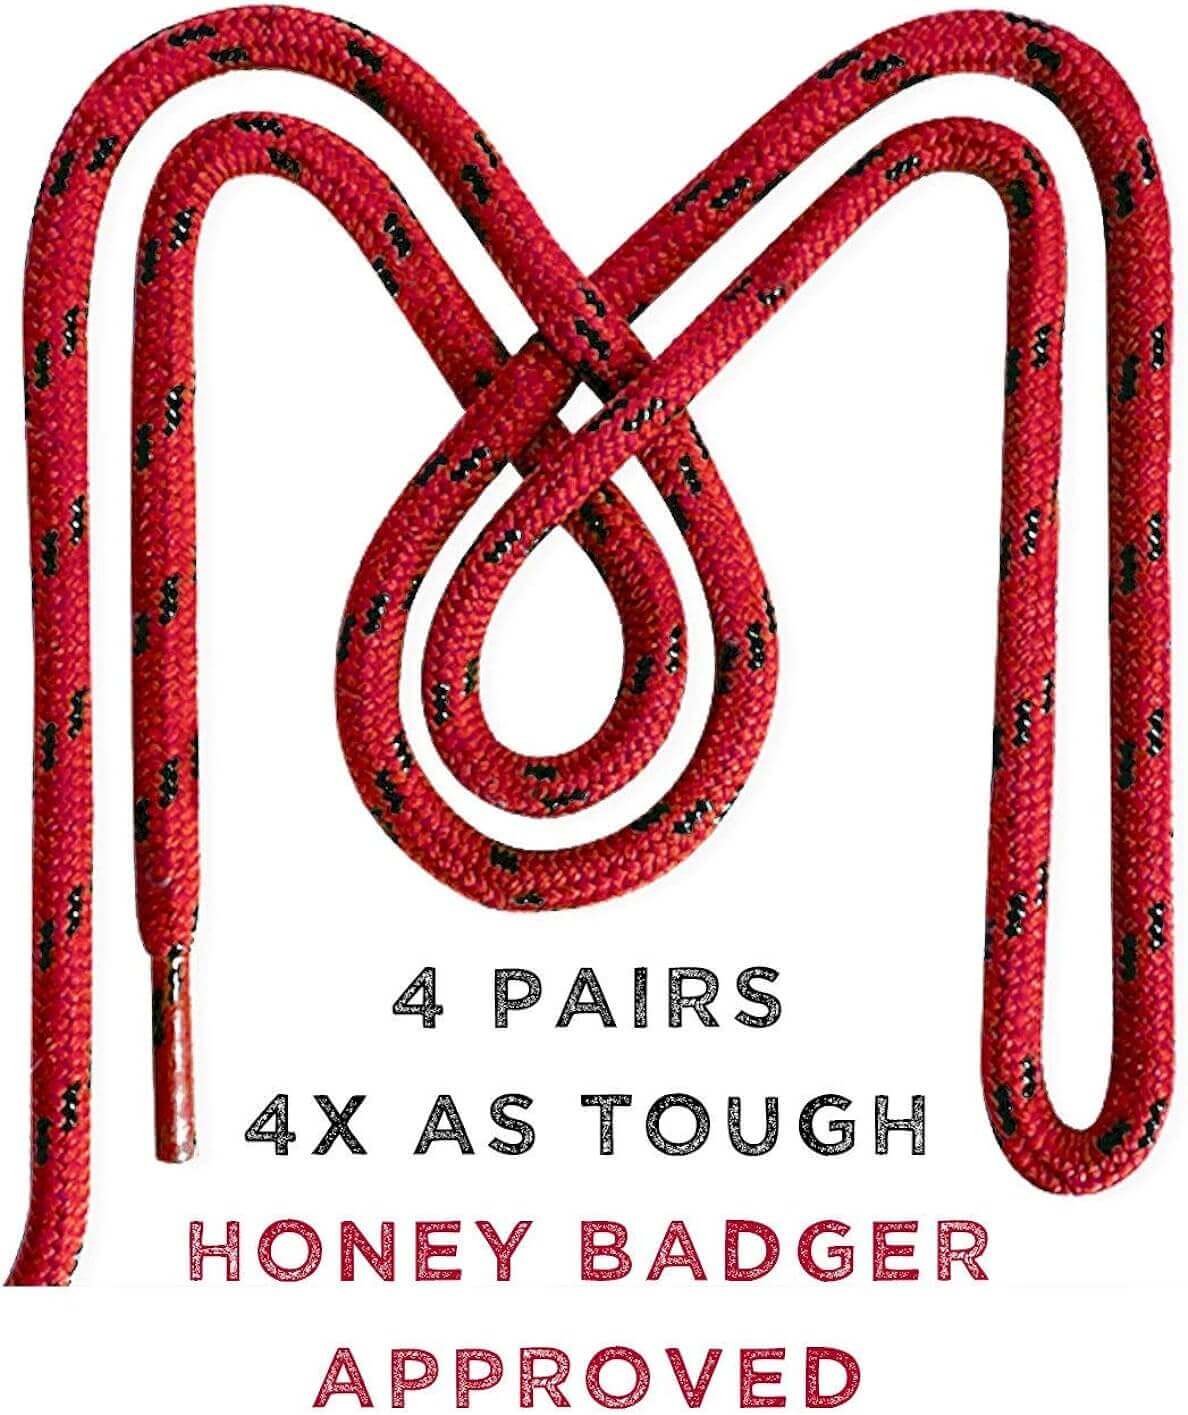 Shop The Latest >Honey Badger Boot Laces Heavy Duty w/Kevlar - Made in USA > *Only $31.04*> From The Top Brand > *Honey Badgerl* > Shop Now and Get Free Shipping On Orders Over $45.00 >*Shop Earth Foot*